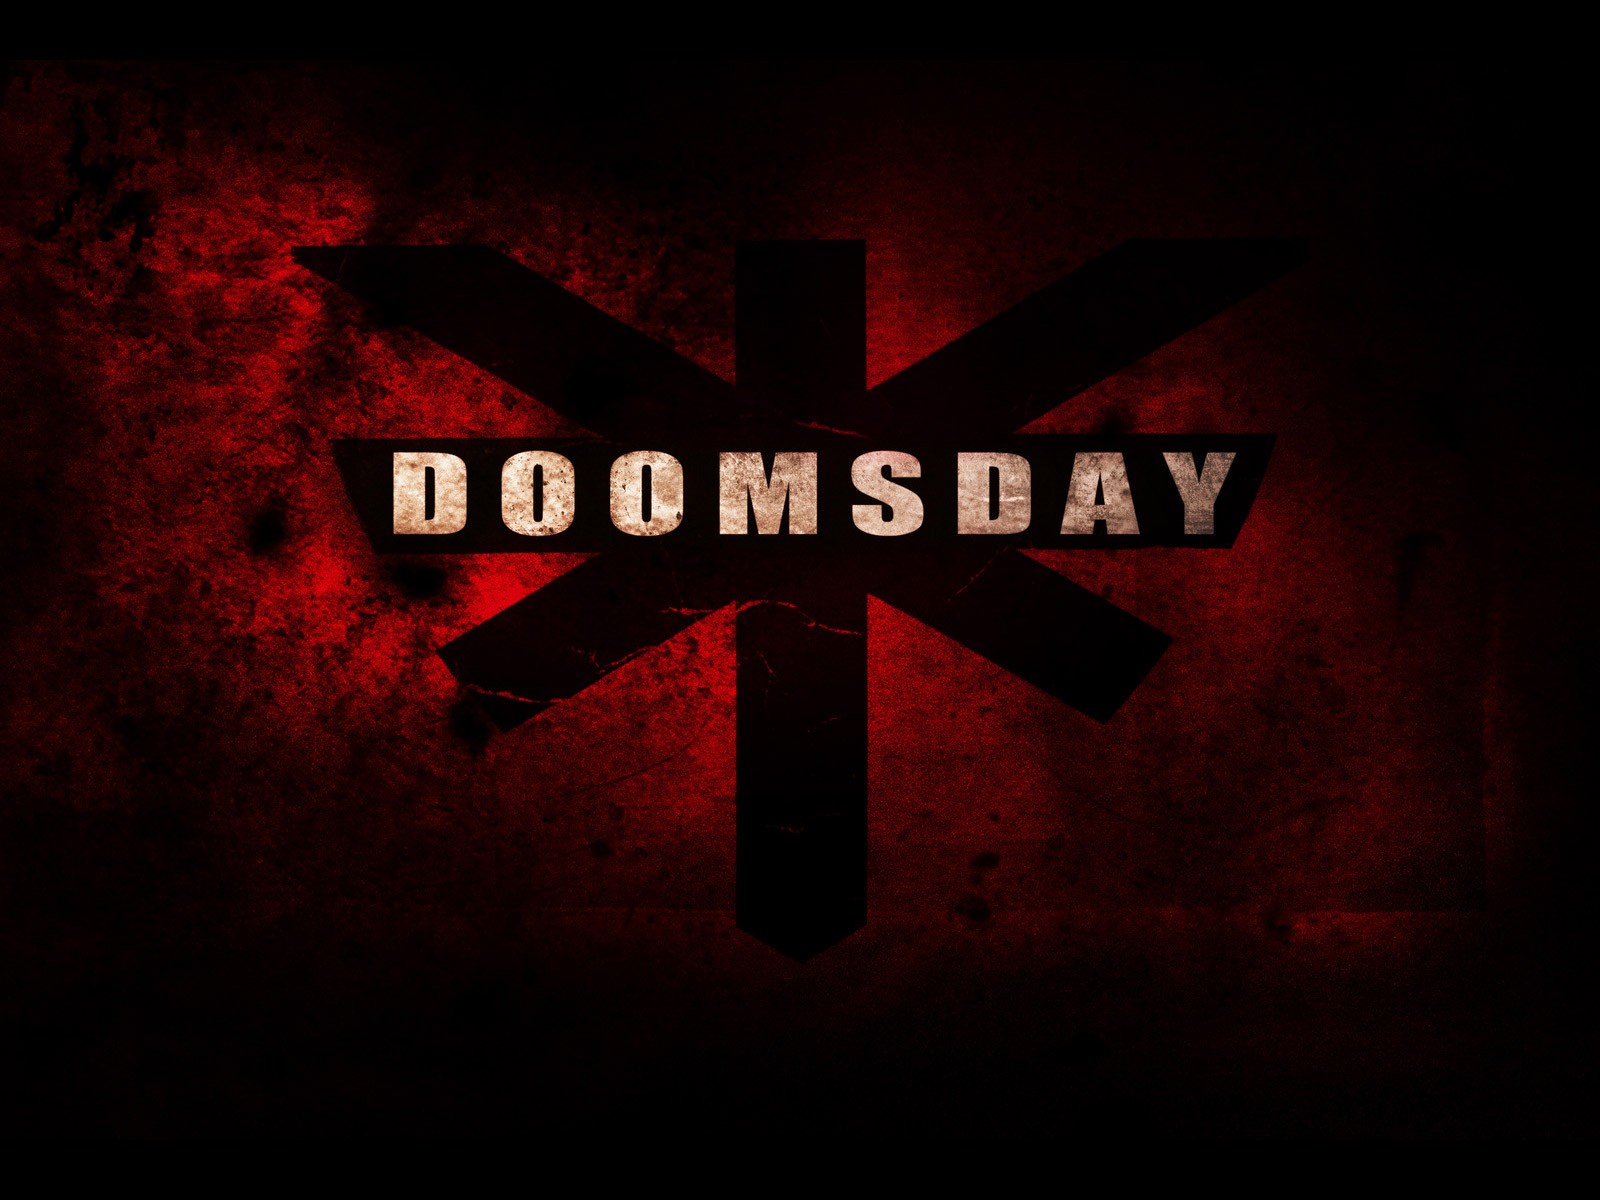 Download High quality Doomsday wallpaper / Movies / 1600x1200